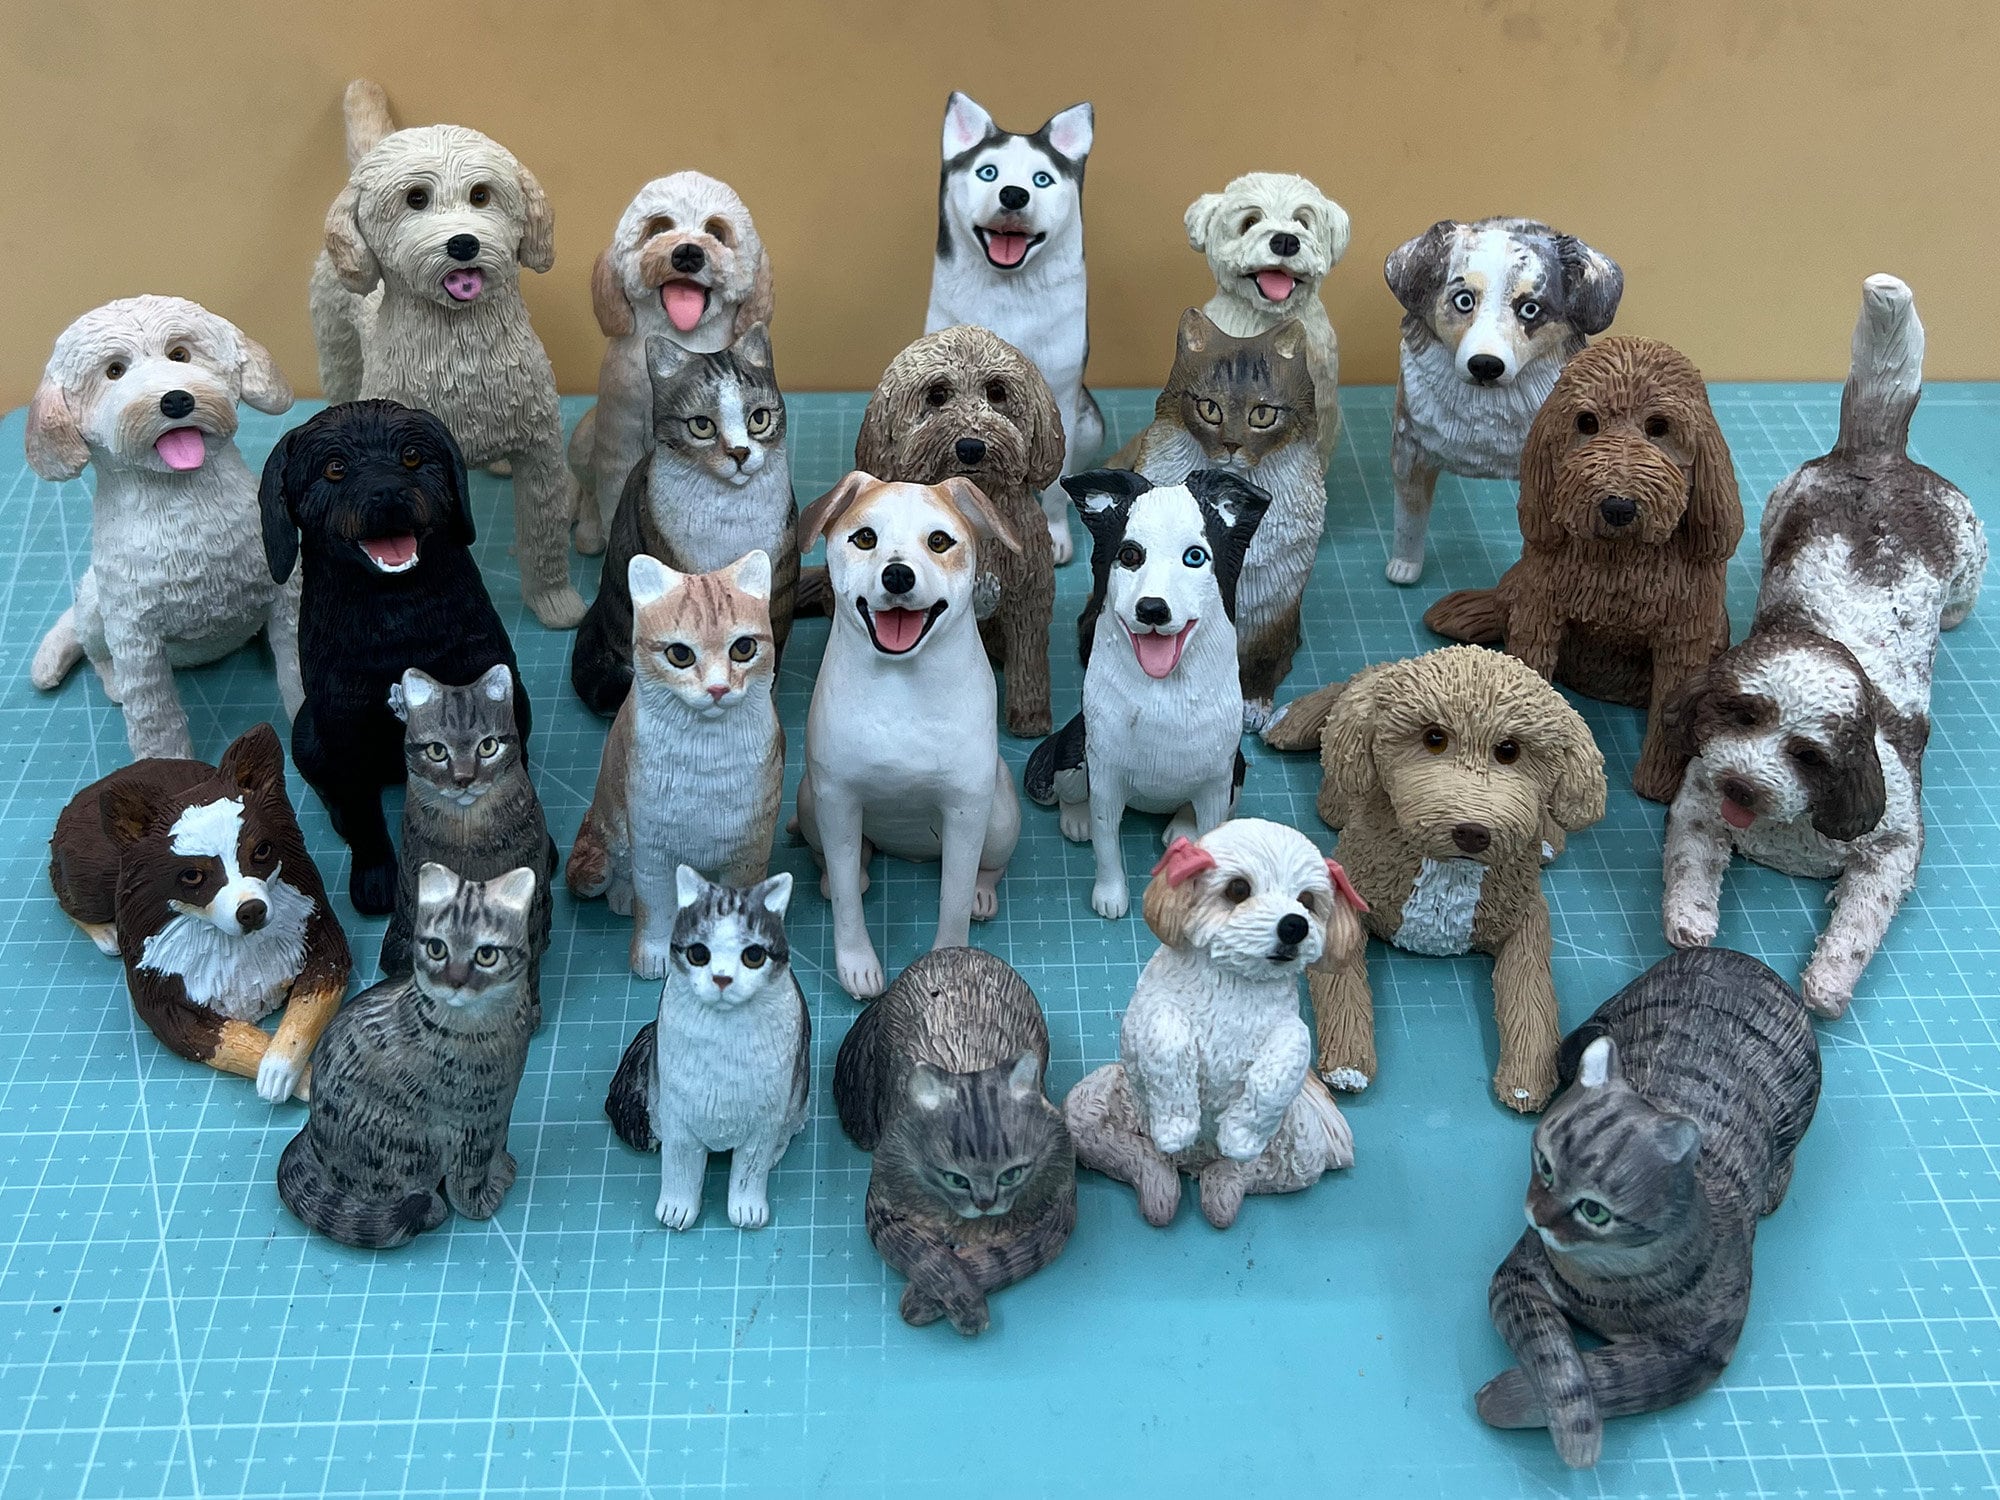 Aydinids Dog Figurine Collie Dog Figurine Figures Realistic Pet Dog Figures Simulated Dog for Christmas Birthday Gift Party Decoration, Collie